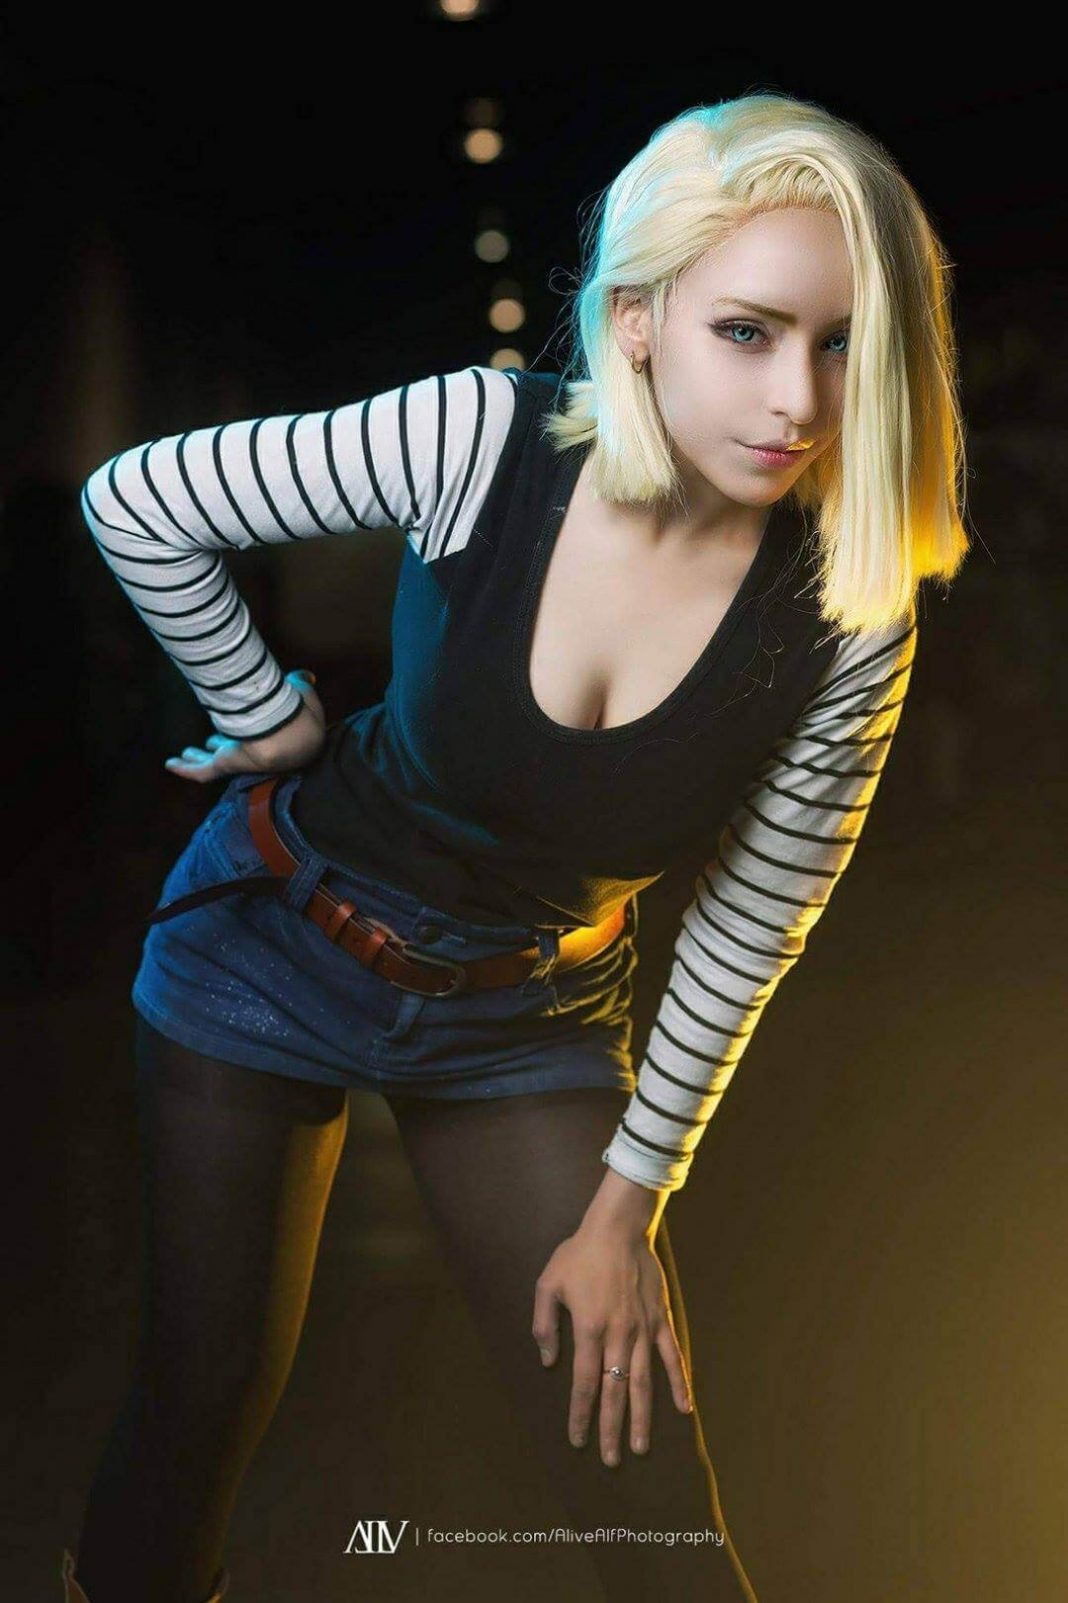 49 Android 18 Nude Pictures Which Prove Beauty Beyond Recognition 34